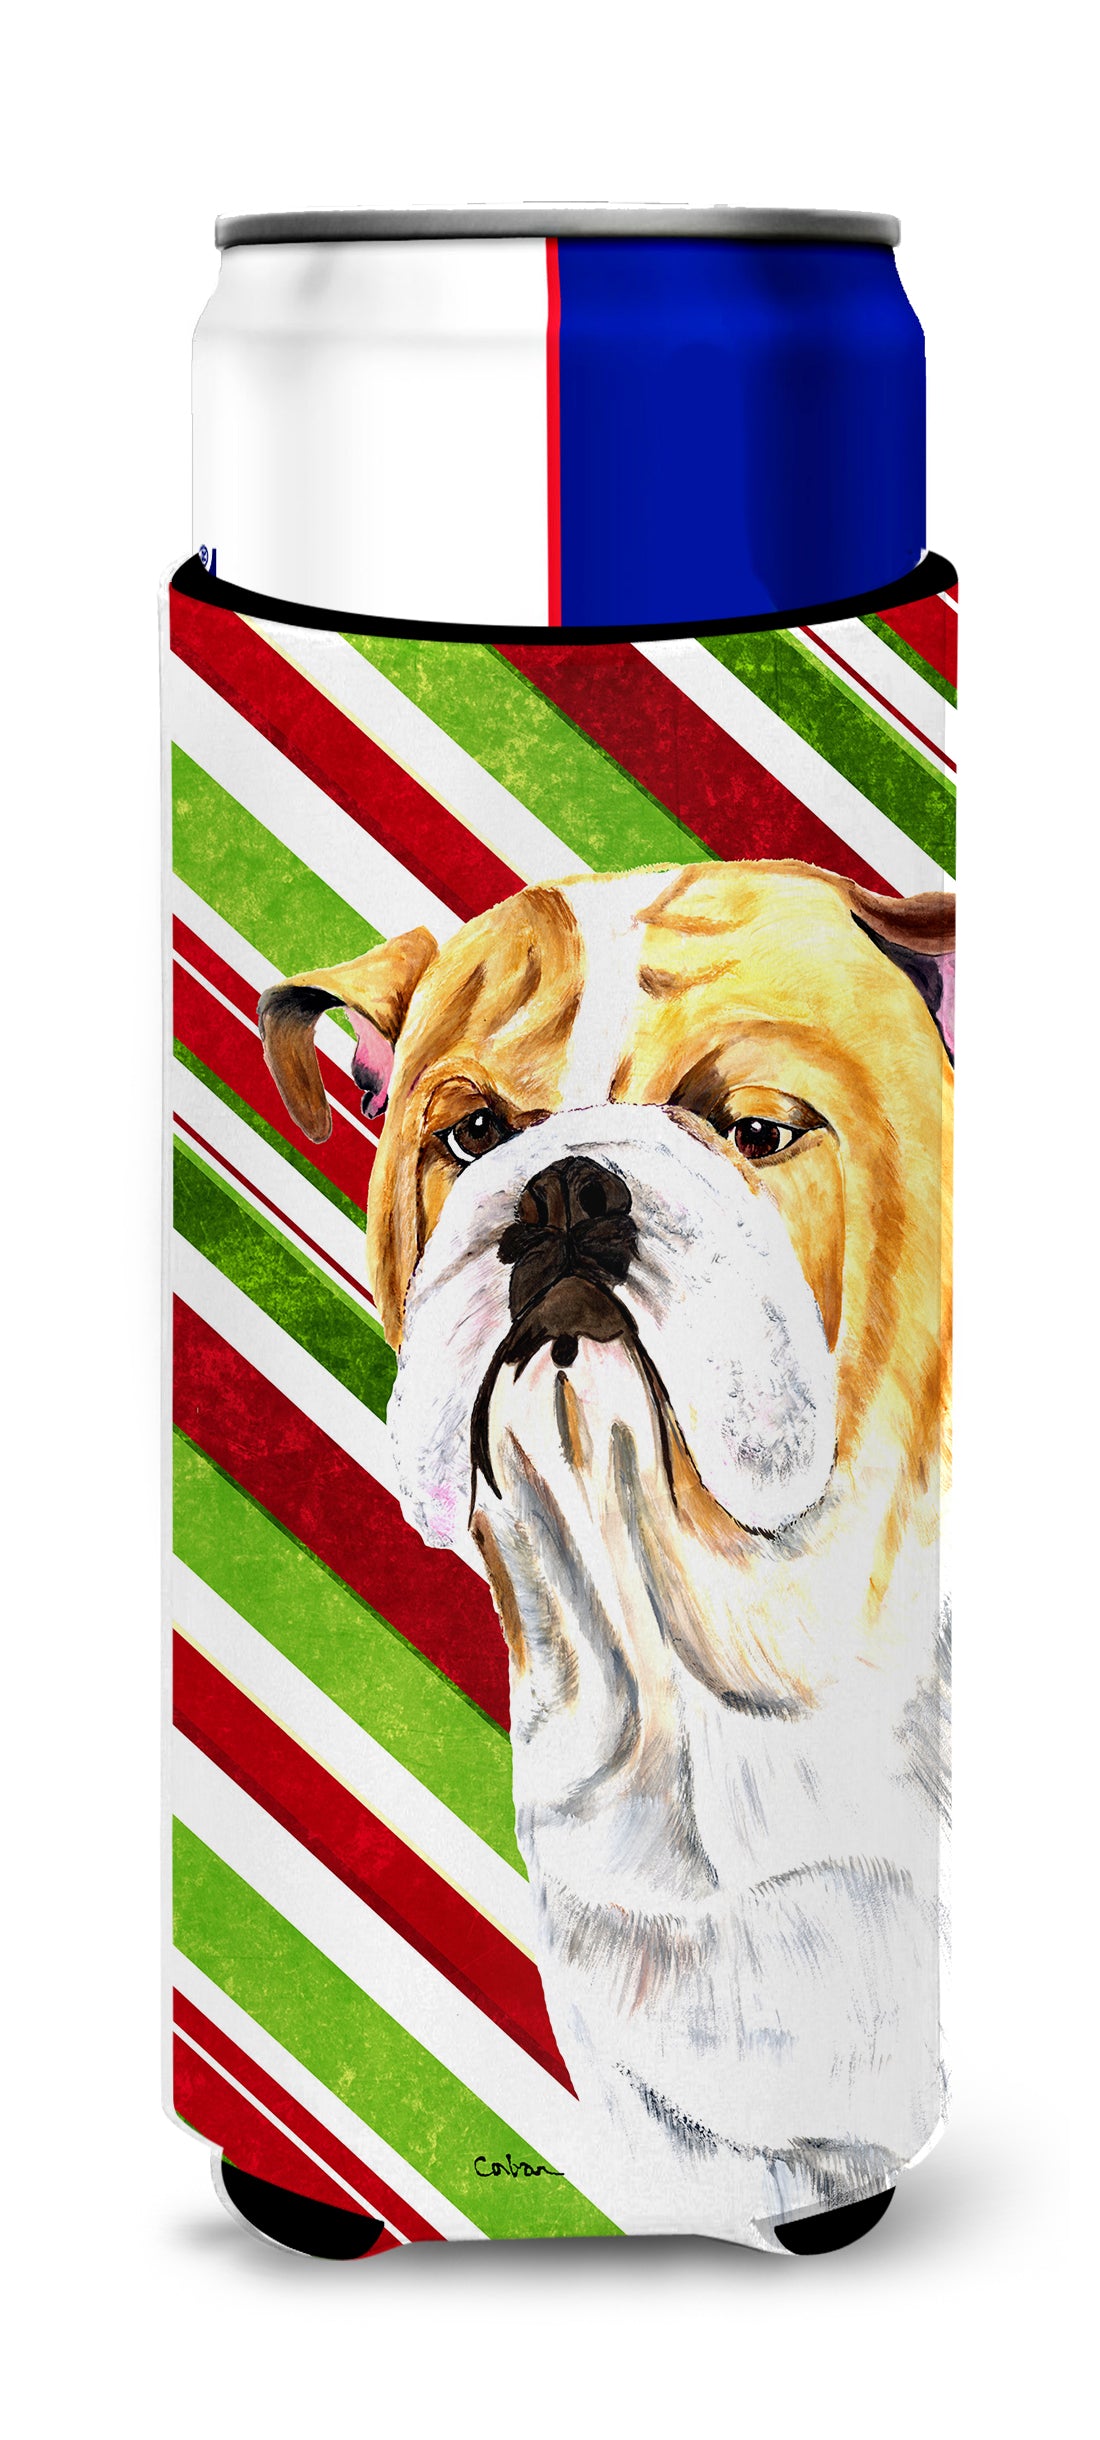 Bulldog English Candy Cane Holiday Christmas Ultra Beverage Insulators for slim cans SC9334MUK.